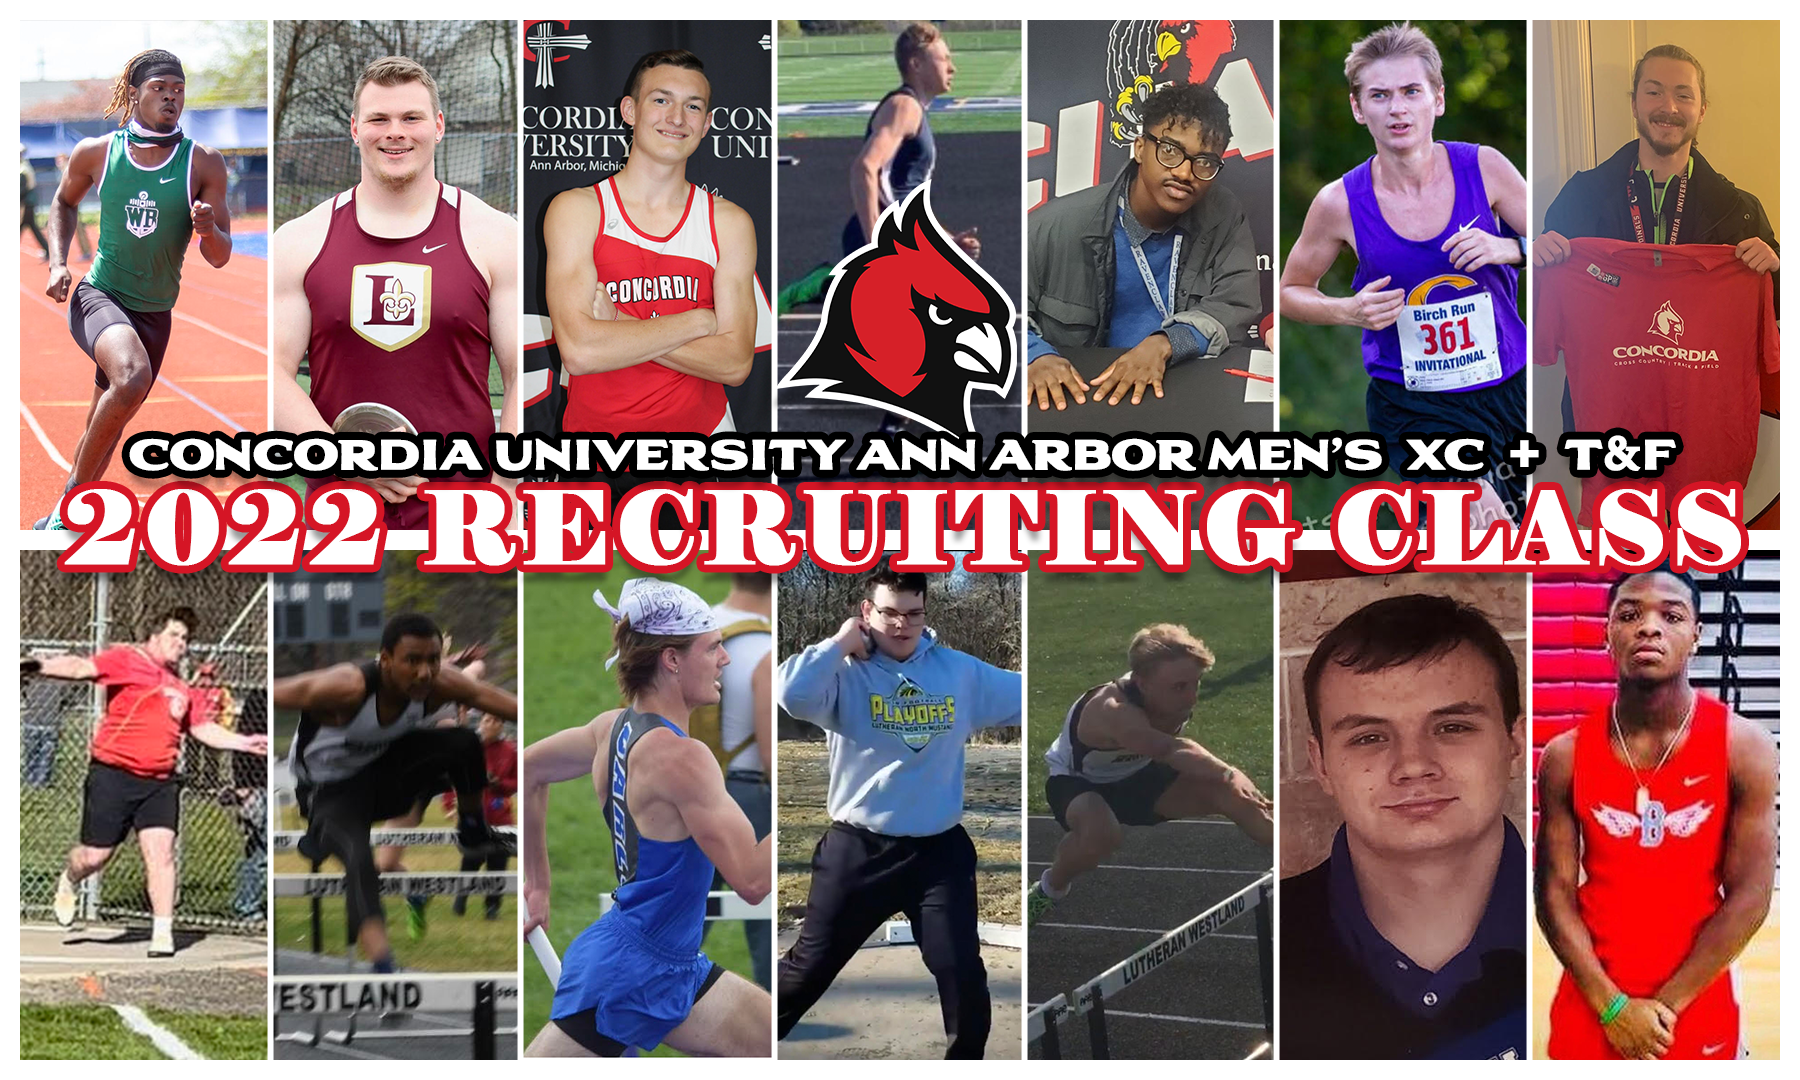 Cross Country and Track & Field Announce 2022-23 Men’s Recruiting